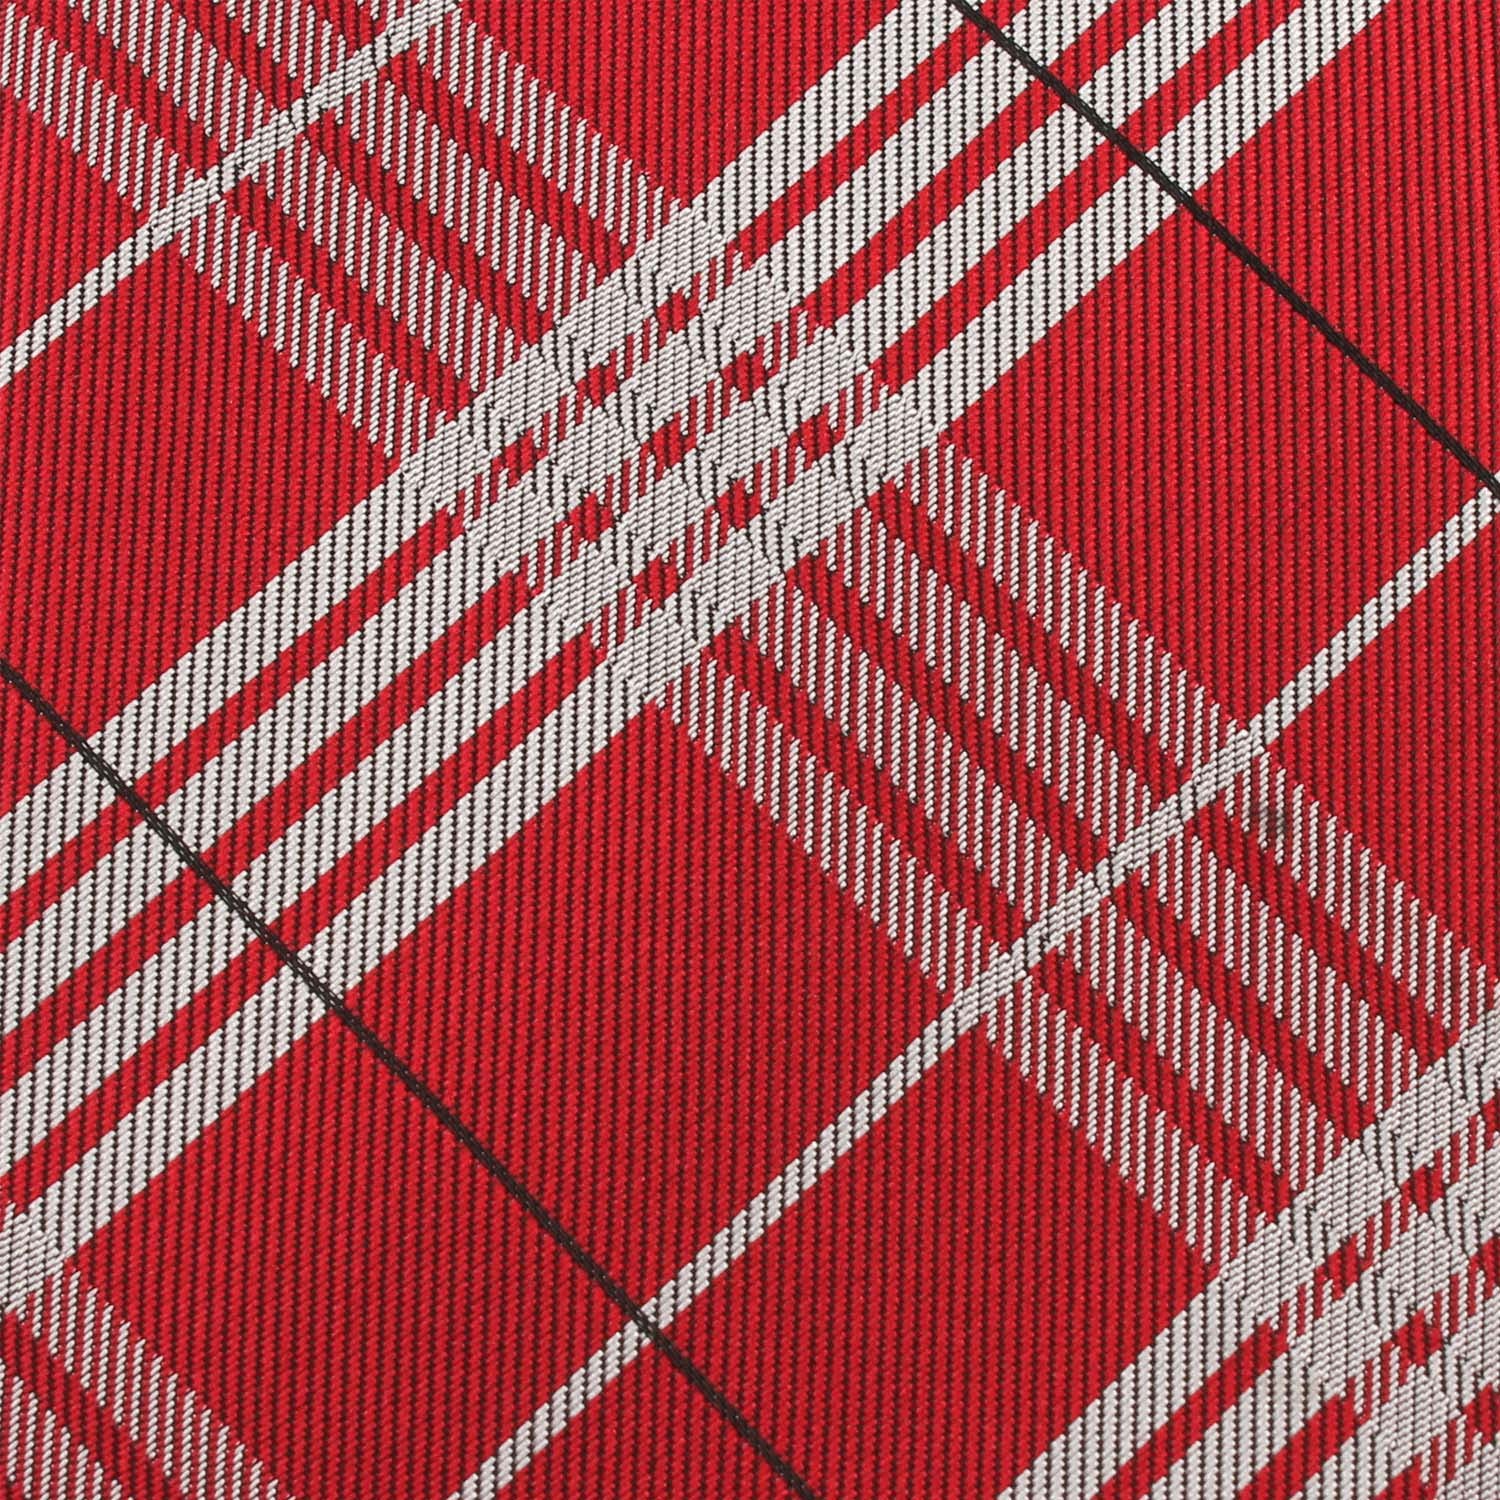 Scarlet Maroon with White Stripes Fabric Pocket Square X269